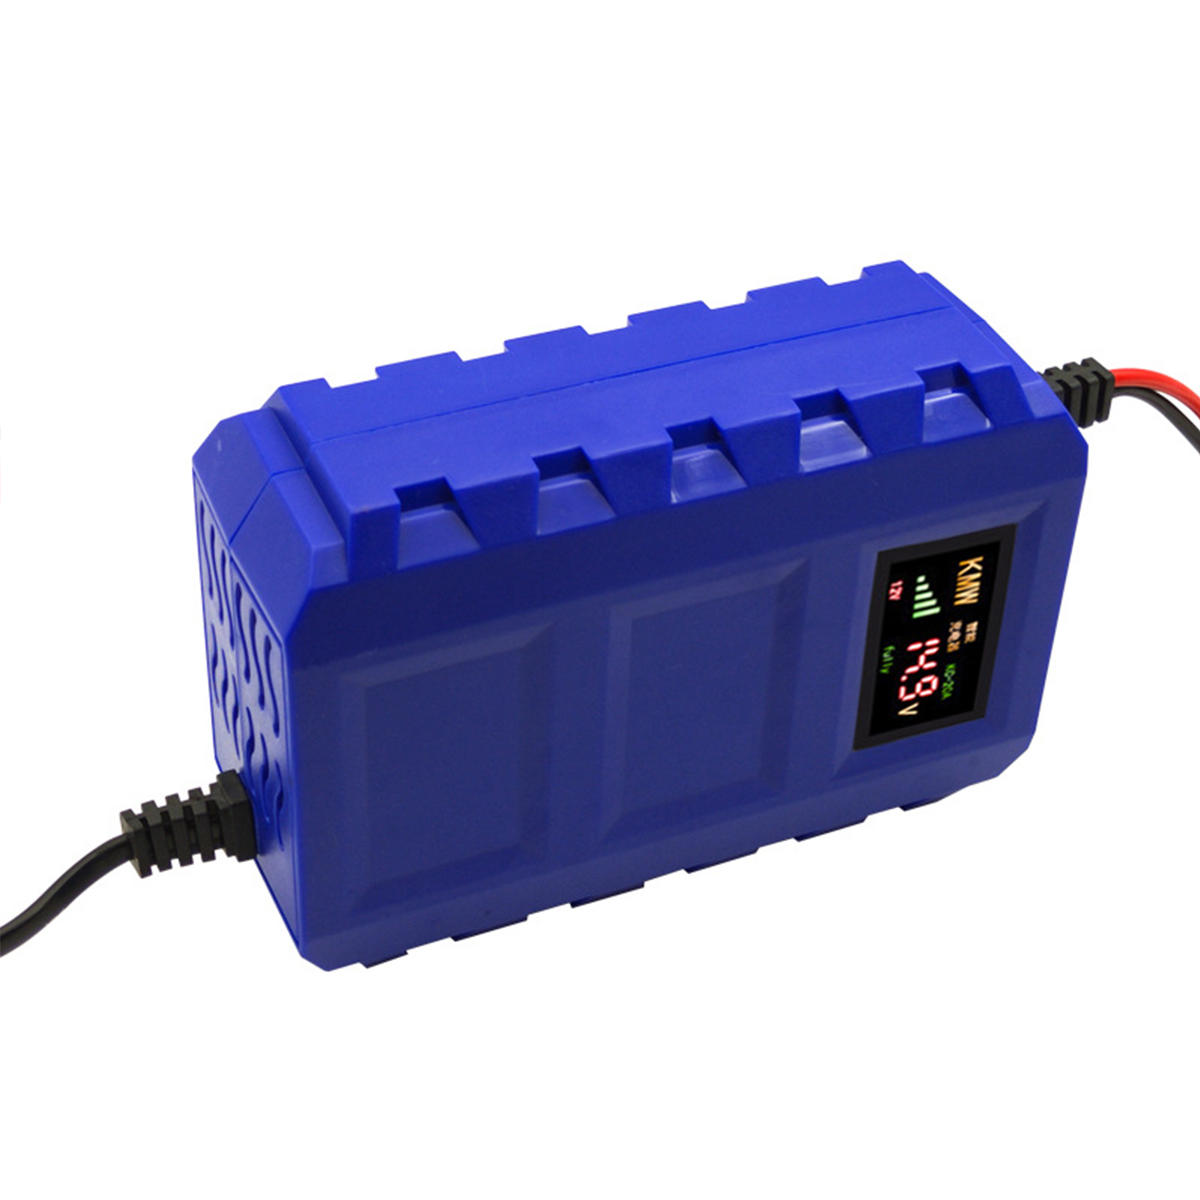 12V 10A SmartBattery Charger Portable Battery Maintainer